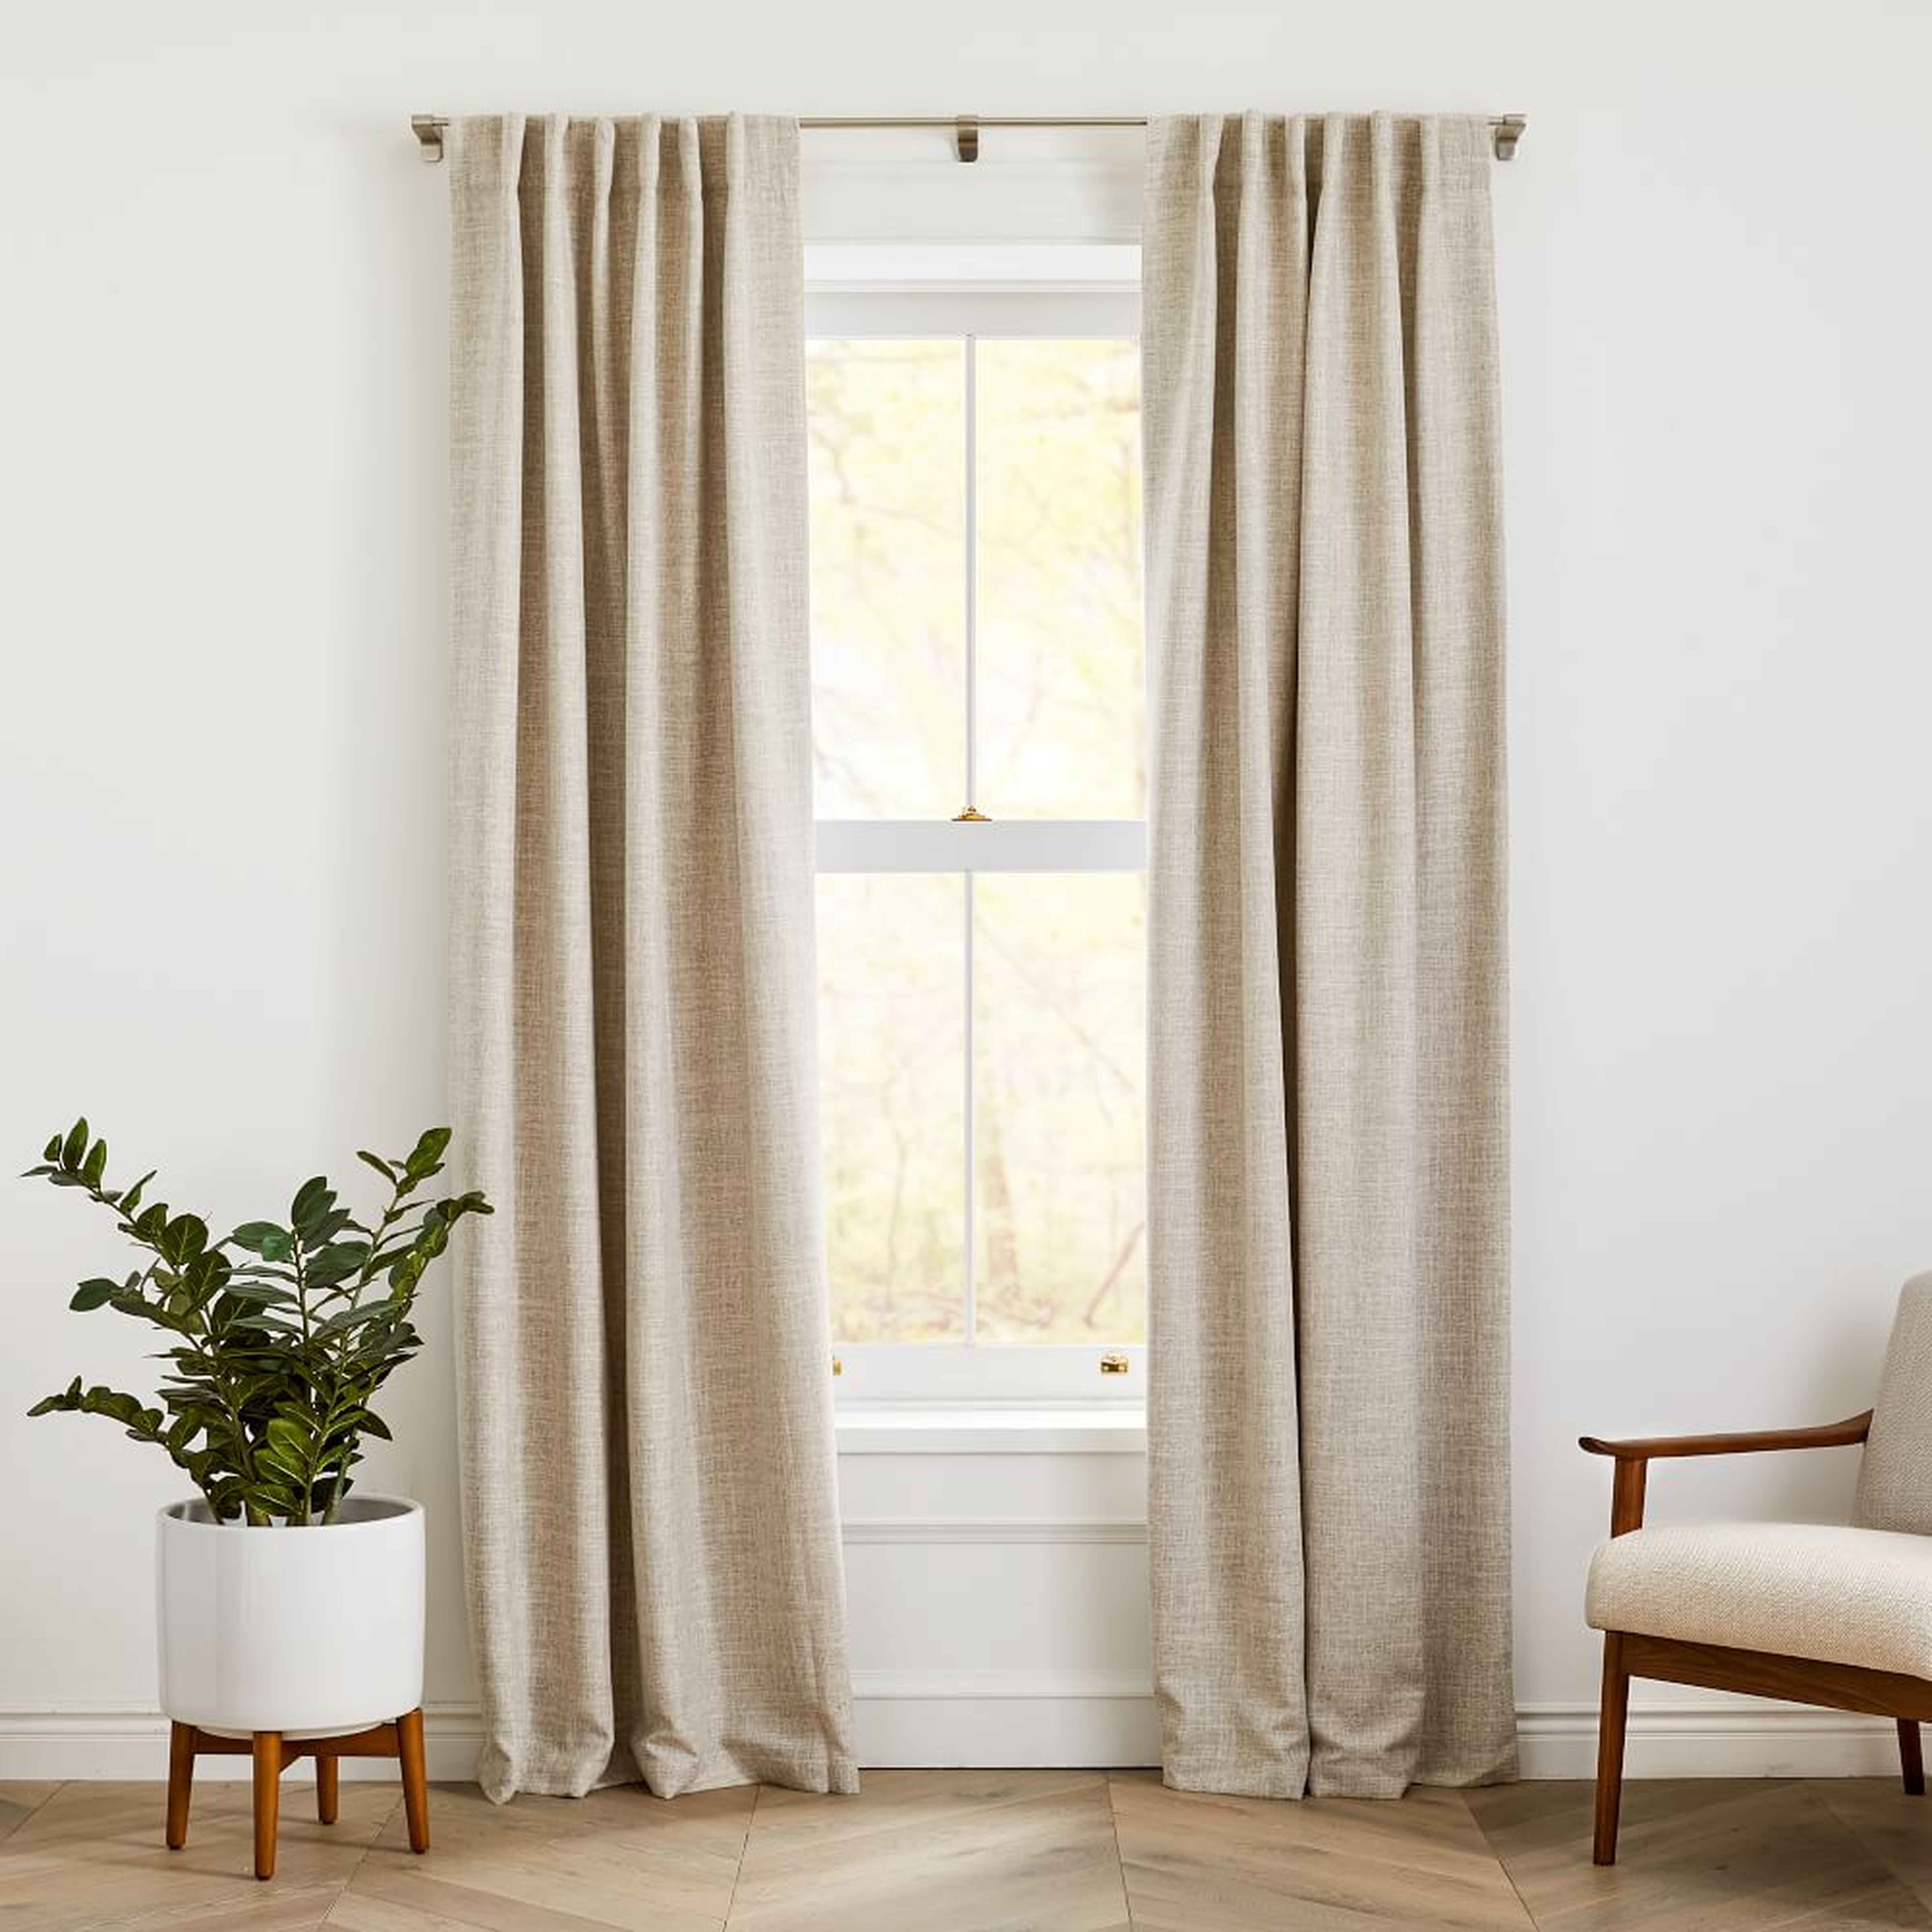 Crossweave Curtain with Black Out Belgian Flax 48"x84" - West Elm